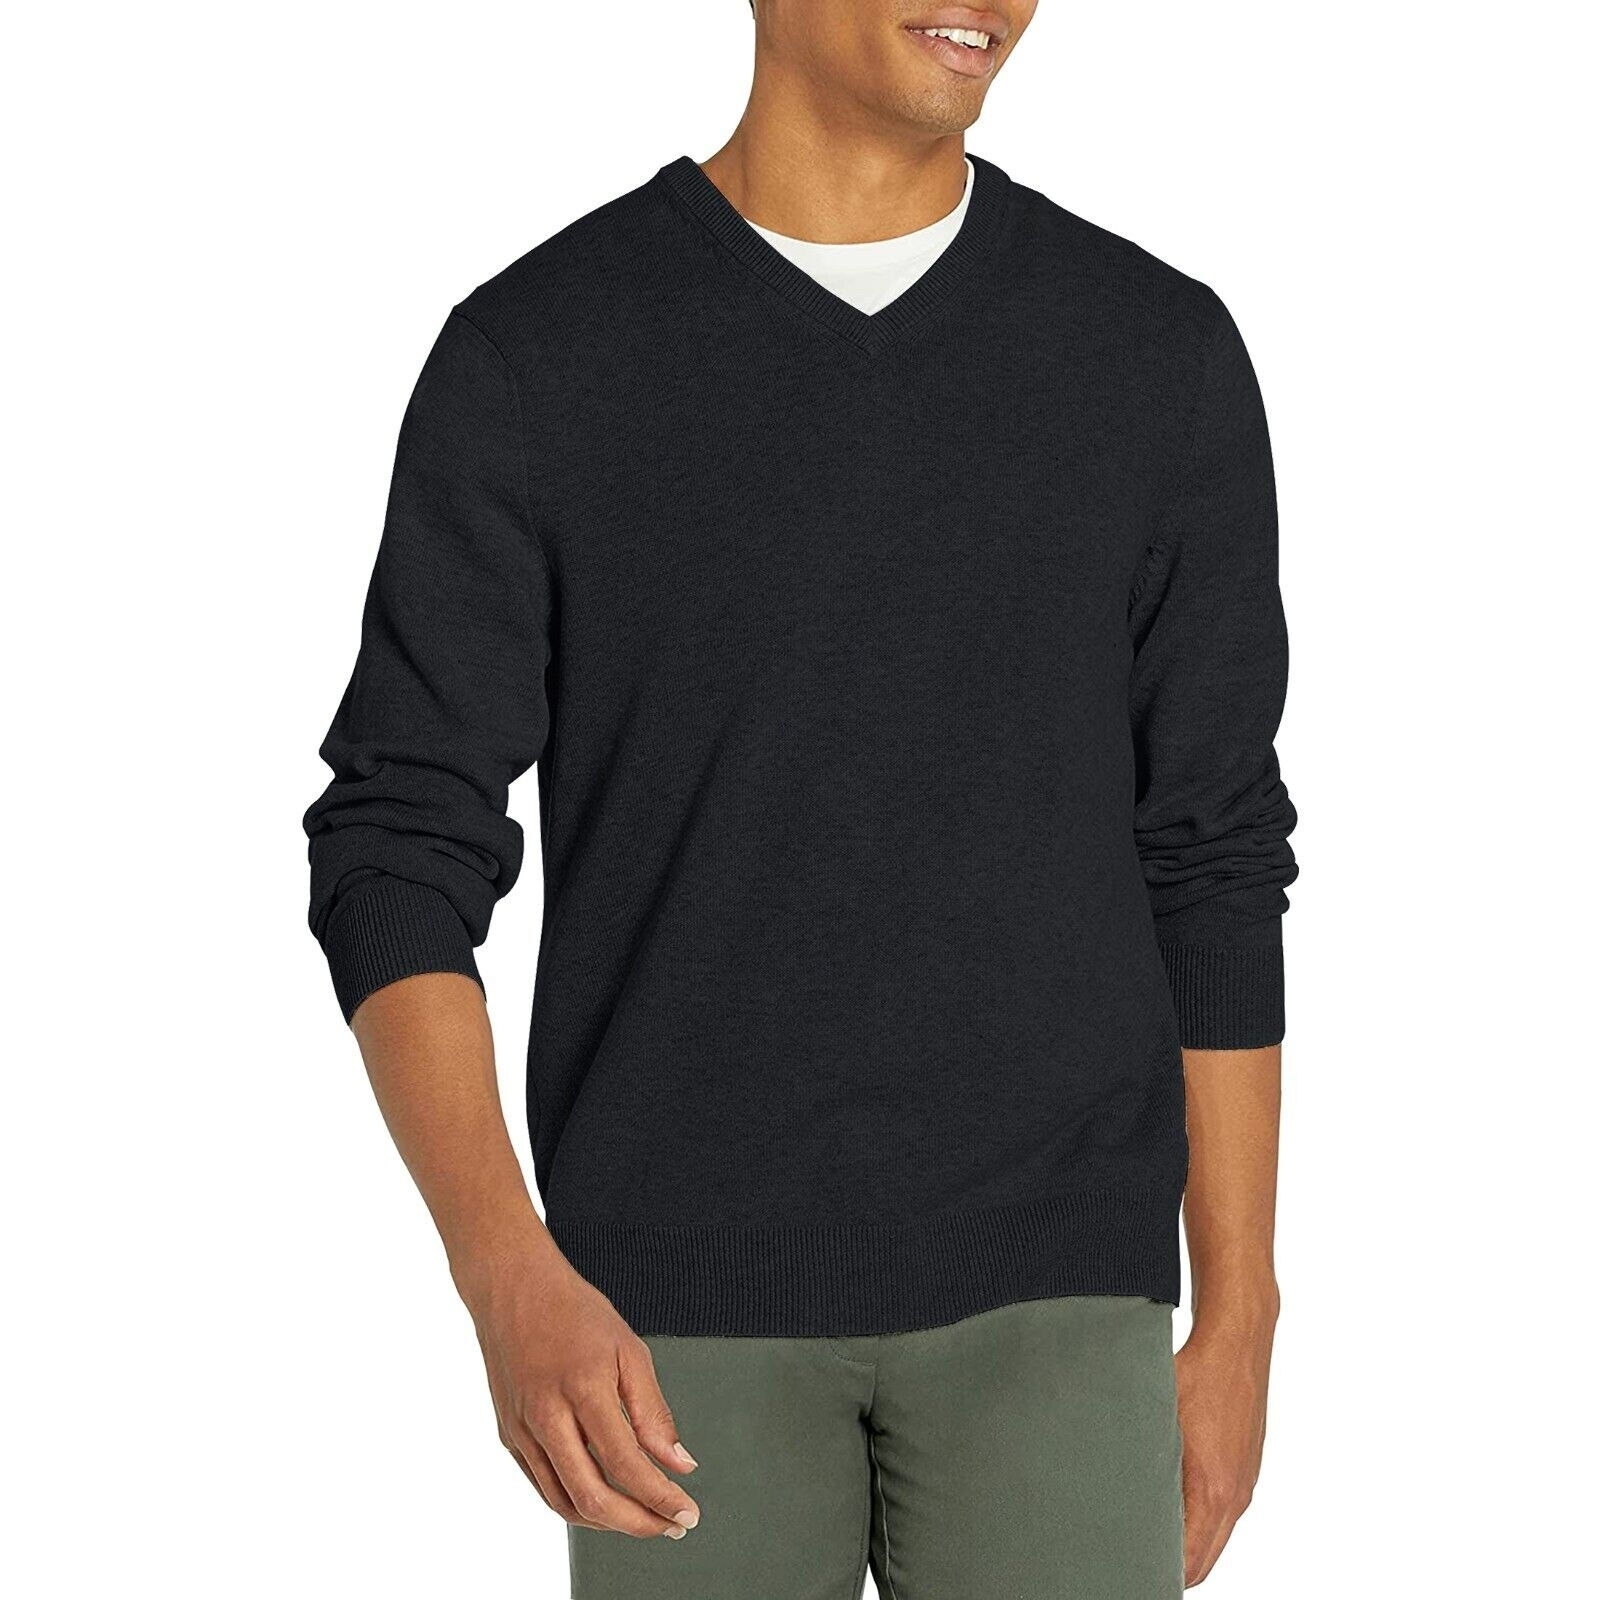 Men's Casual Ultra-Soft Slim Fit Warm Knit Pullover V-Neck Sweater For Winter - Brown, X-Large